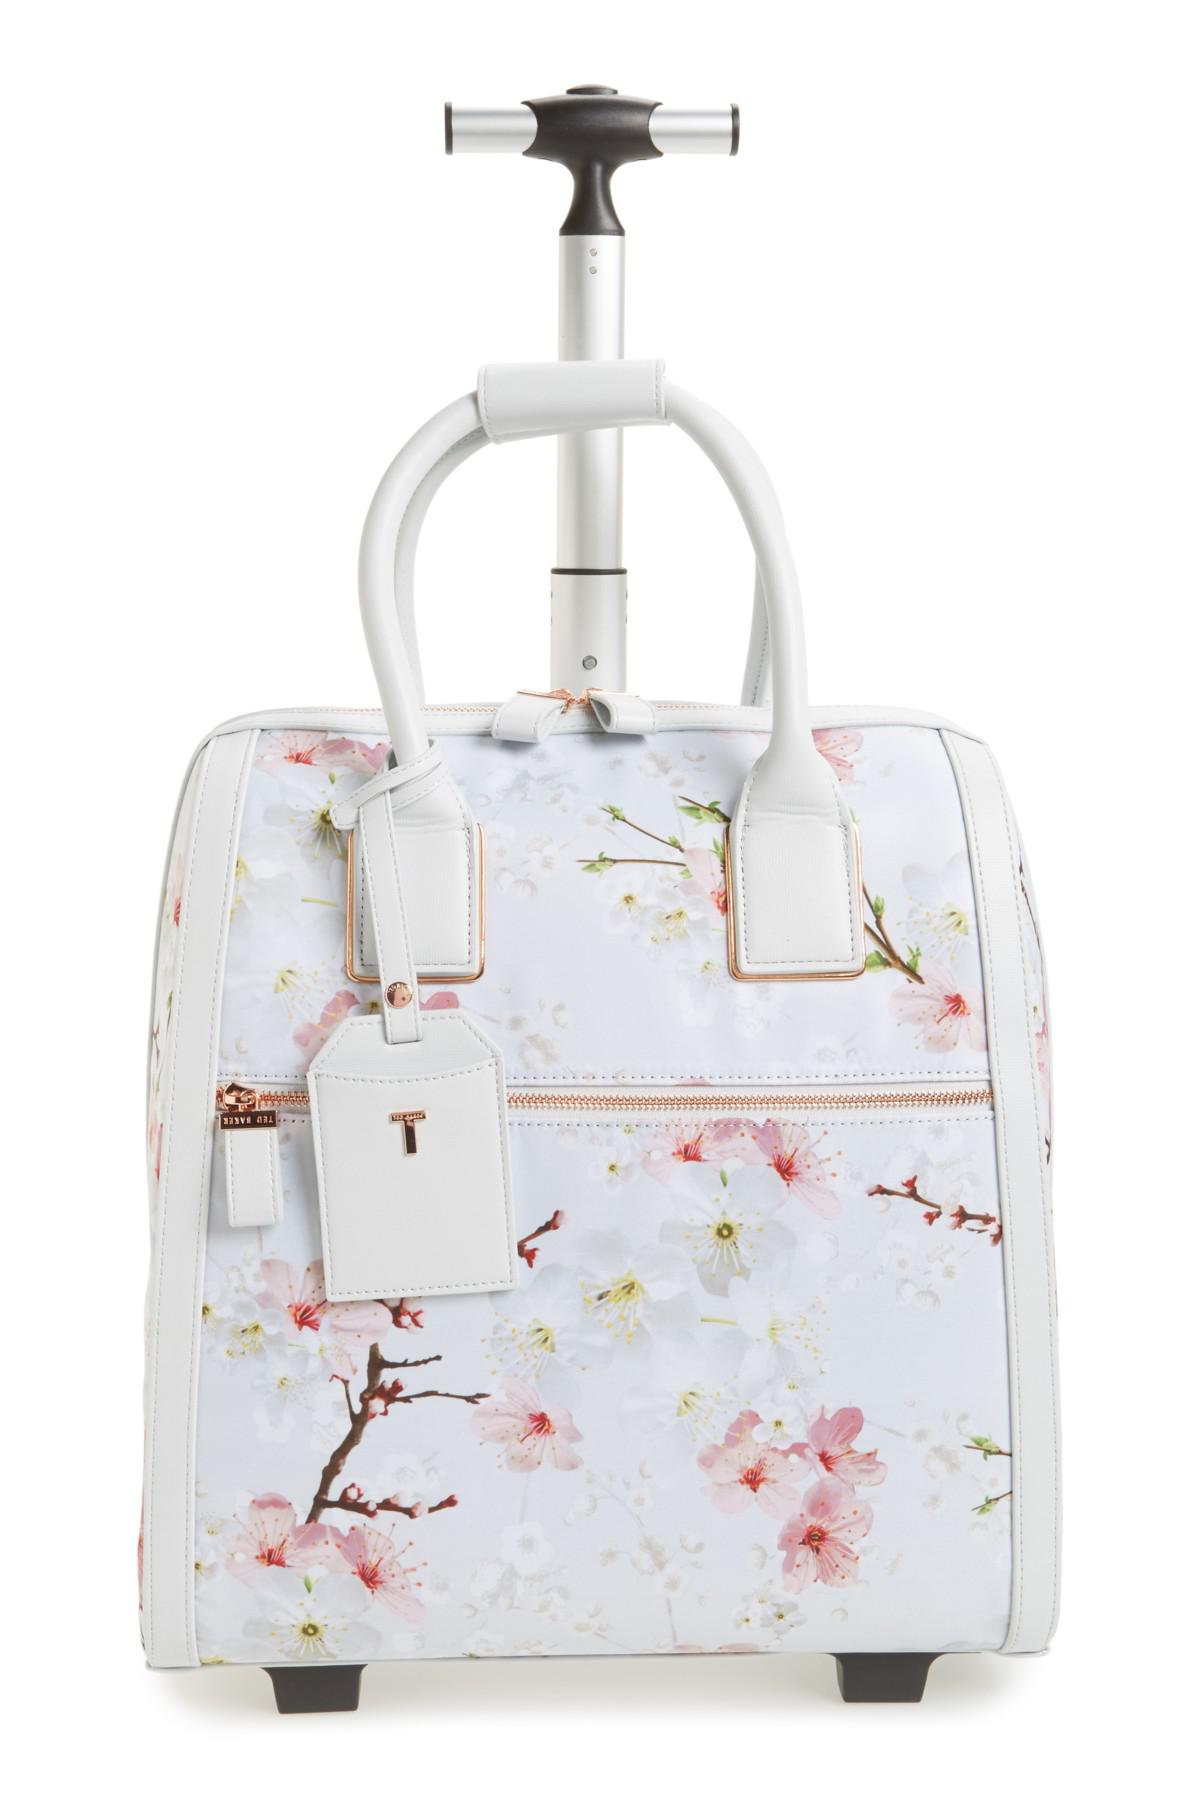 NWT TED BAKER LONDON Large Light Pink Pammcon Soft Cherry Blossom Tote  Kleidung & Accessoires CO6993753